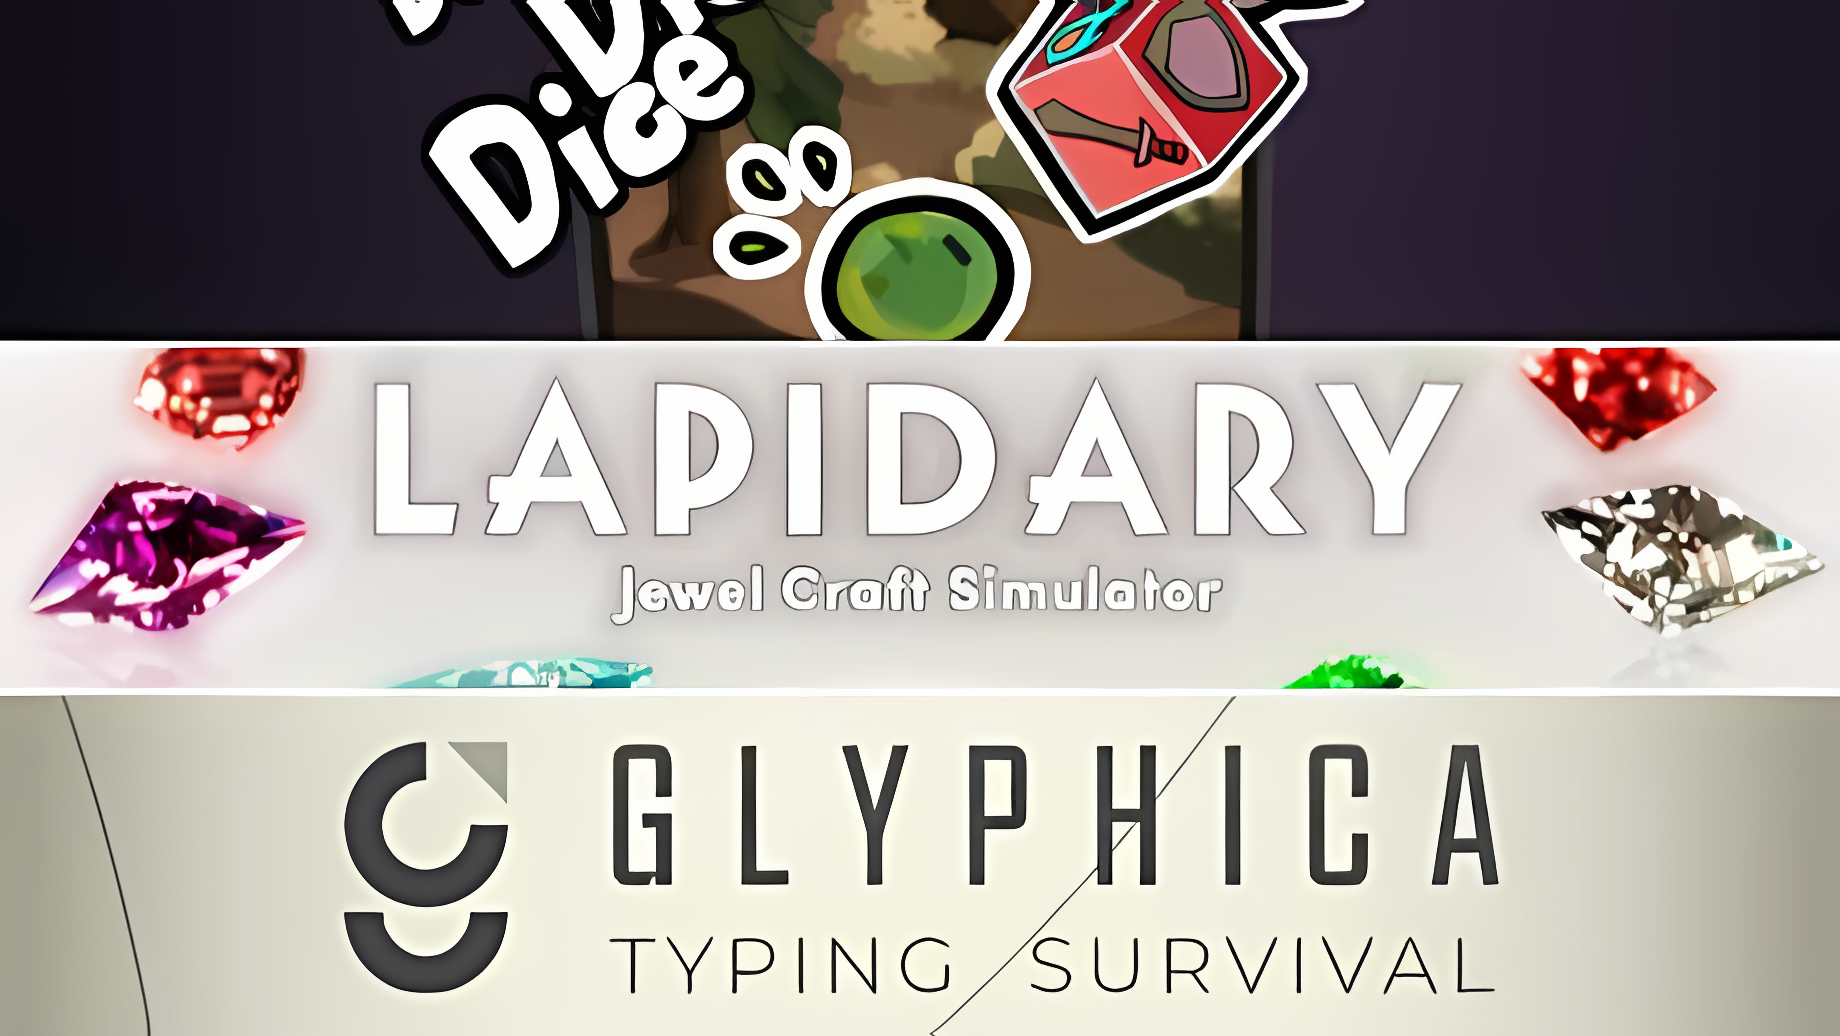 blog featureすべてがサイコロで決まる！ 見た目もサイコロ型のRPG『Dice Dice Dice: A Roll Playing Game』や『LAPIDARY: Jewel Craft Simulator』『Glyphica: Typing Survival』